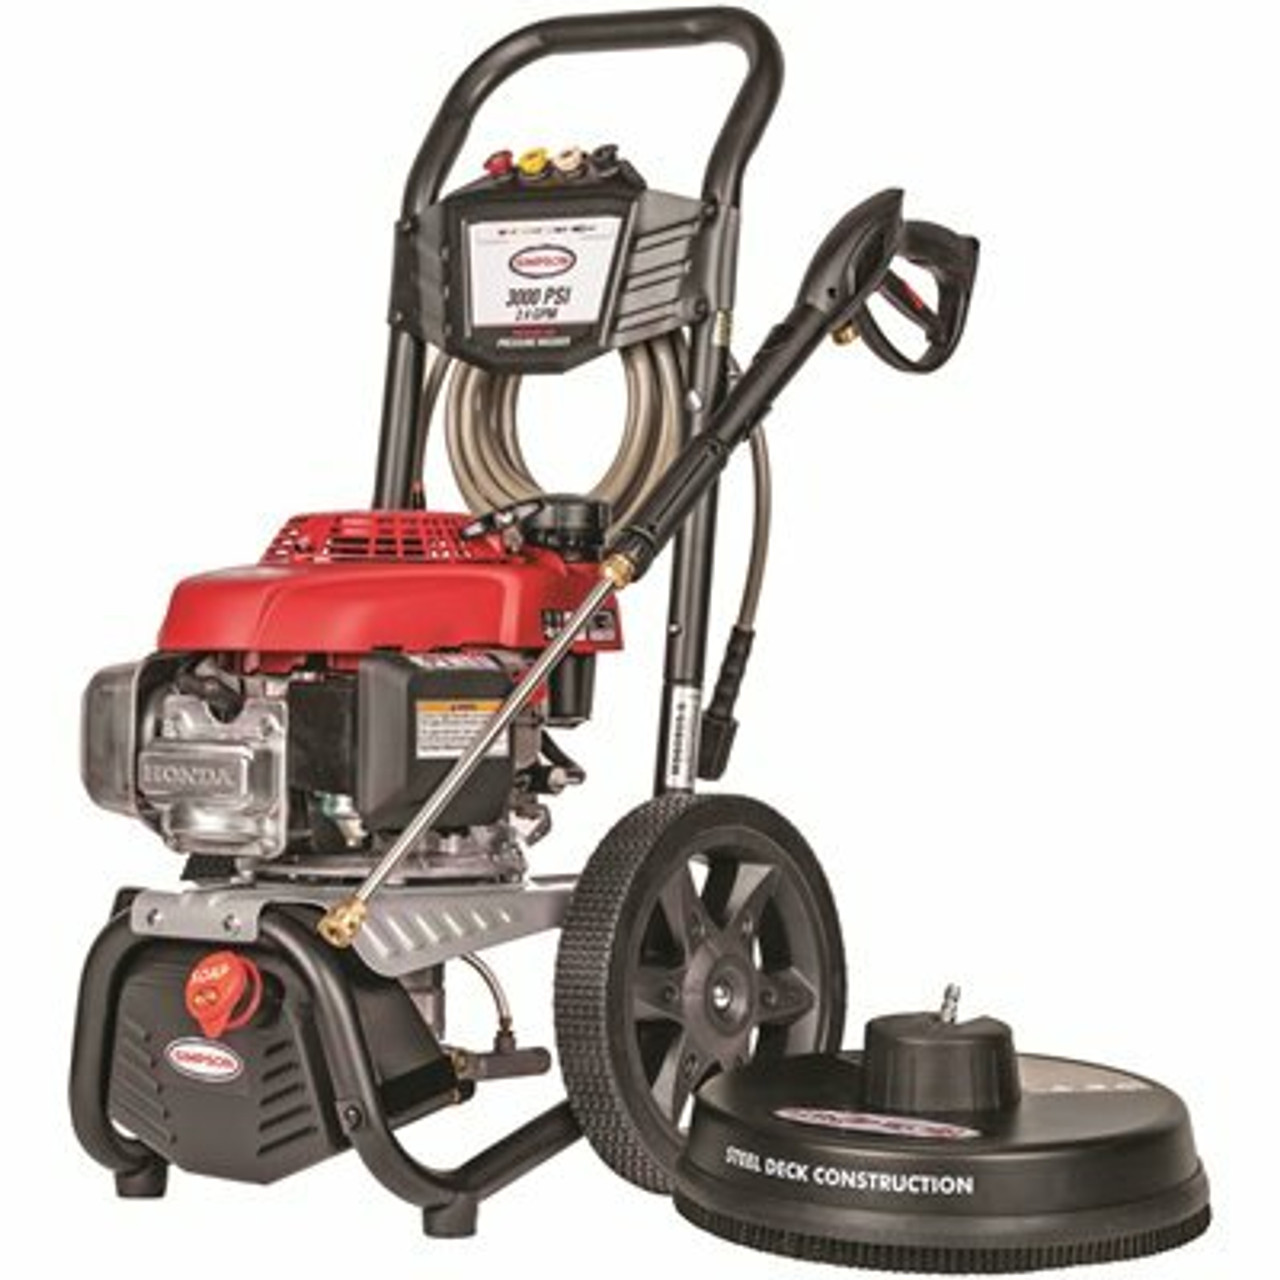 Simpson Megashot Ms60805-S 3000 Psi At 2.4 Gpm Honda Gcv160 Cold Water Gas Pressure Washer With 15 In. Surface Cleaner